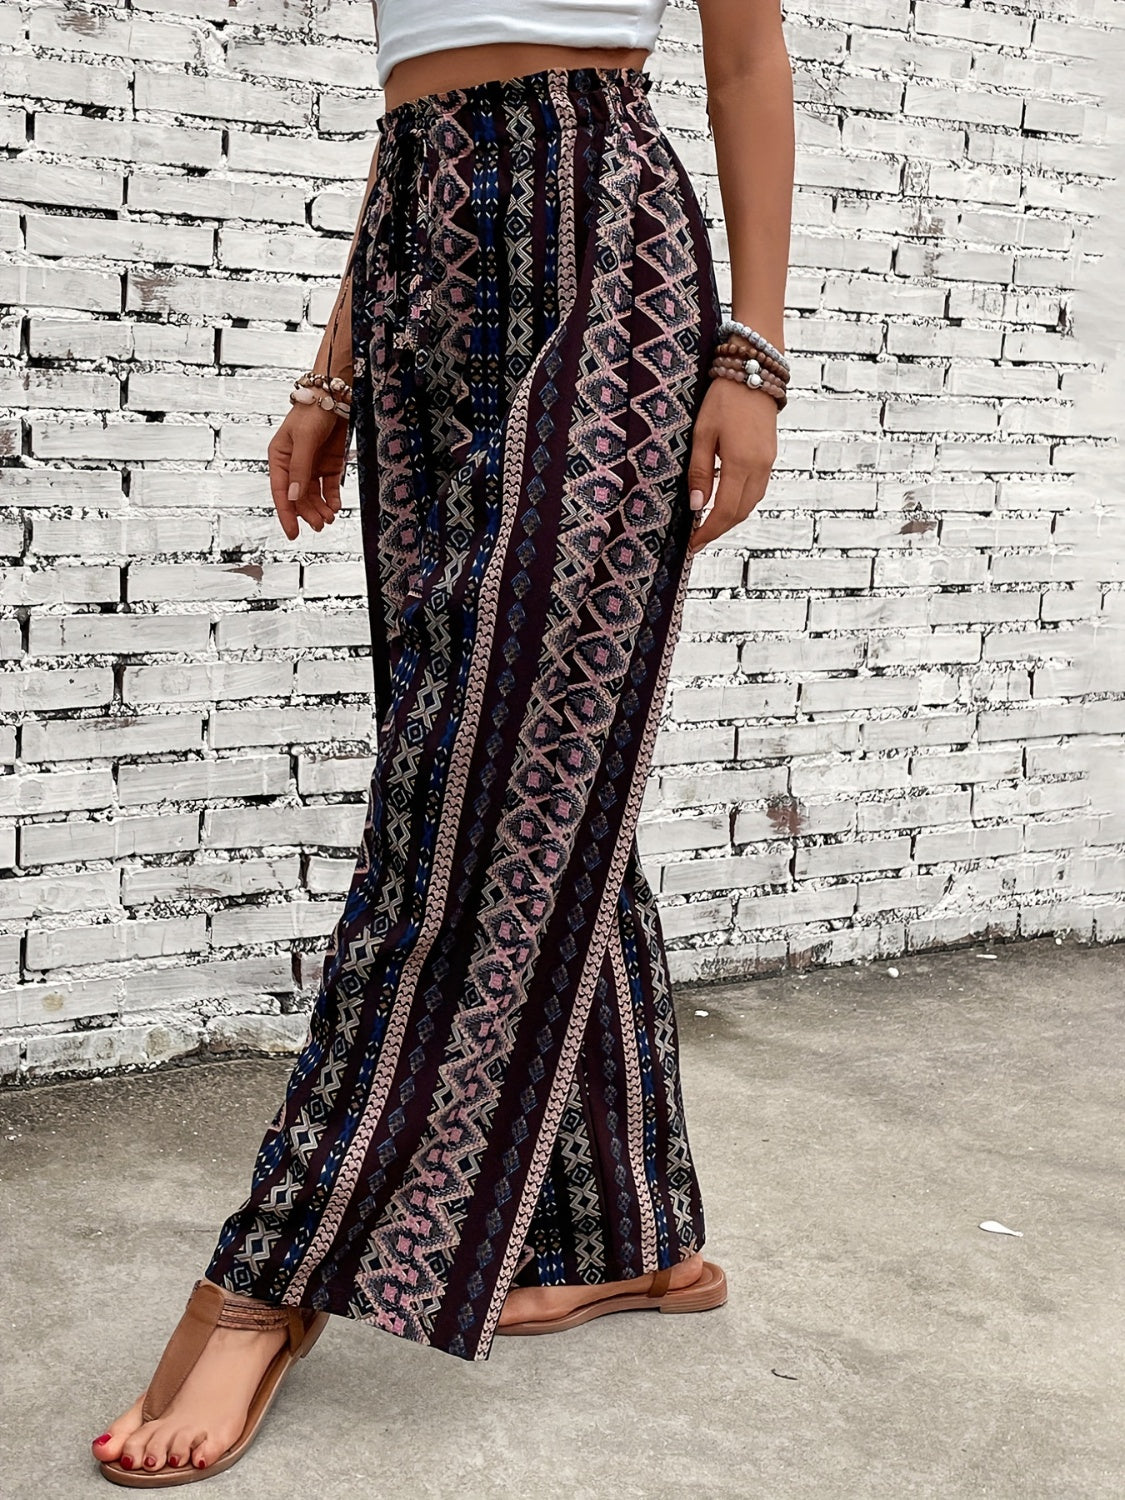 Boho-chic Printed High Waist Wide Leg Pants. Perfect blend of style, comfort, and versatility for the fashion-savvy woman